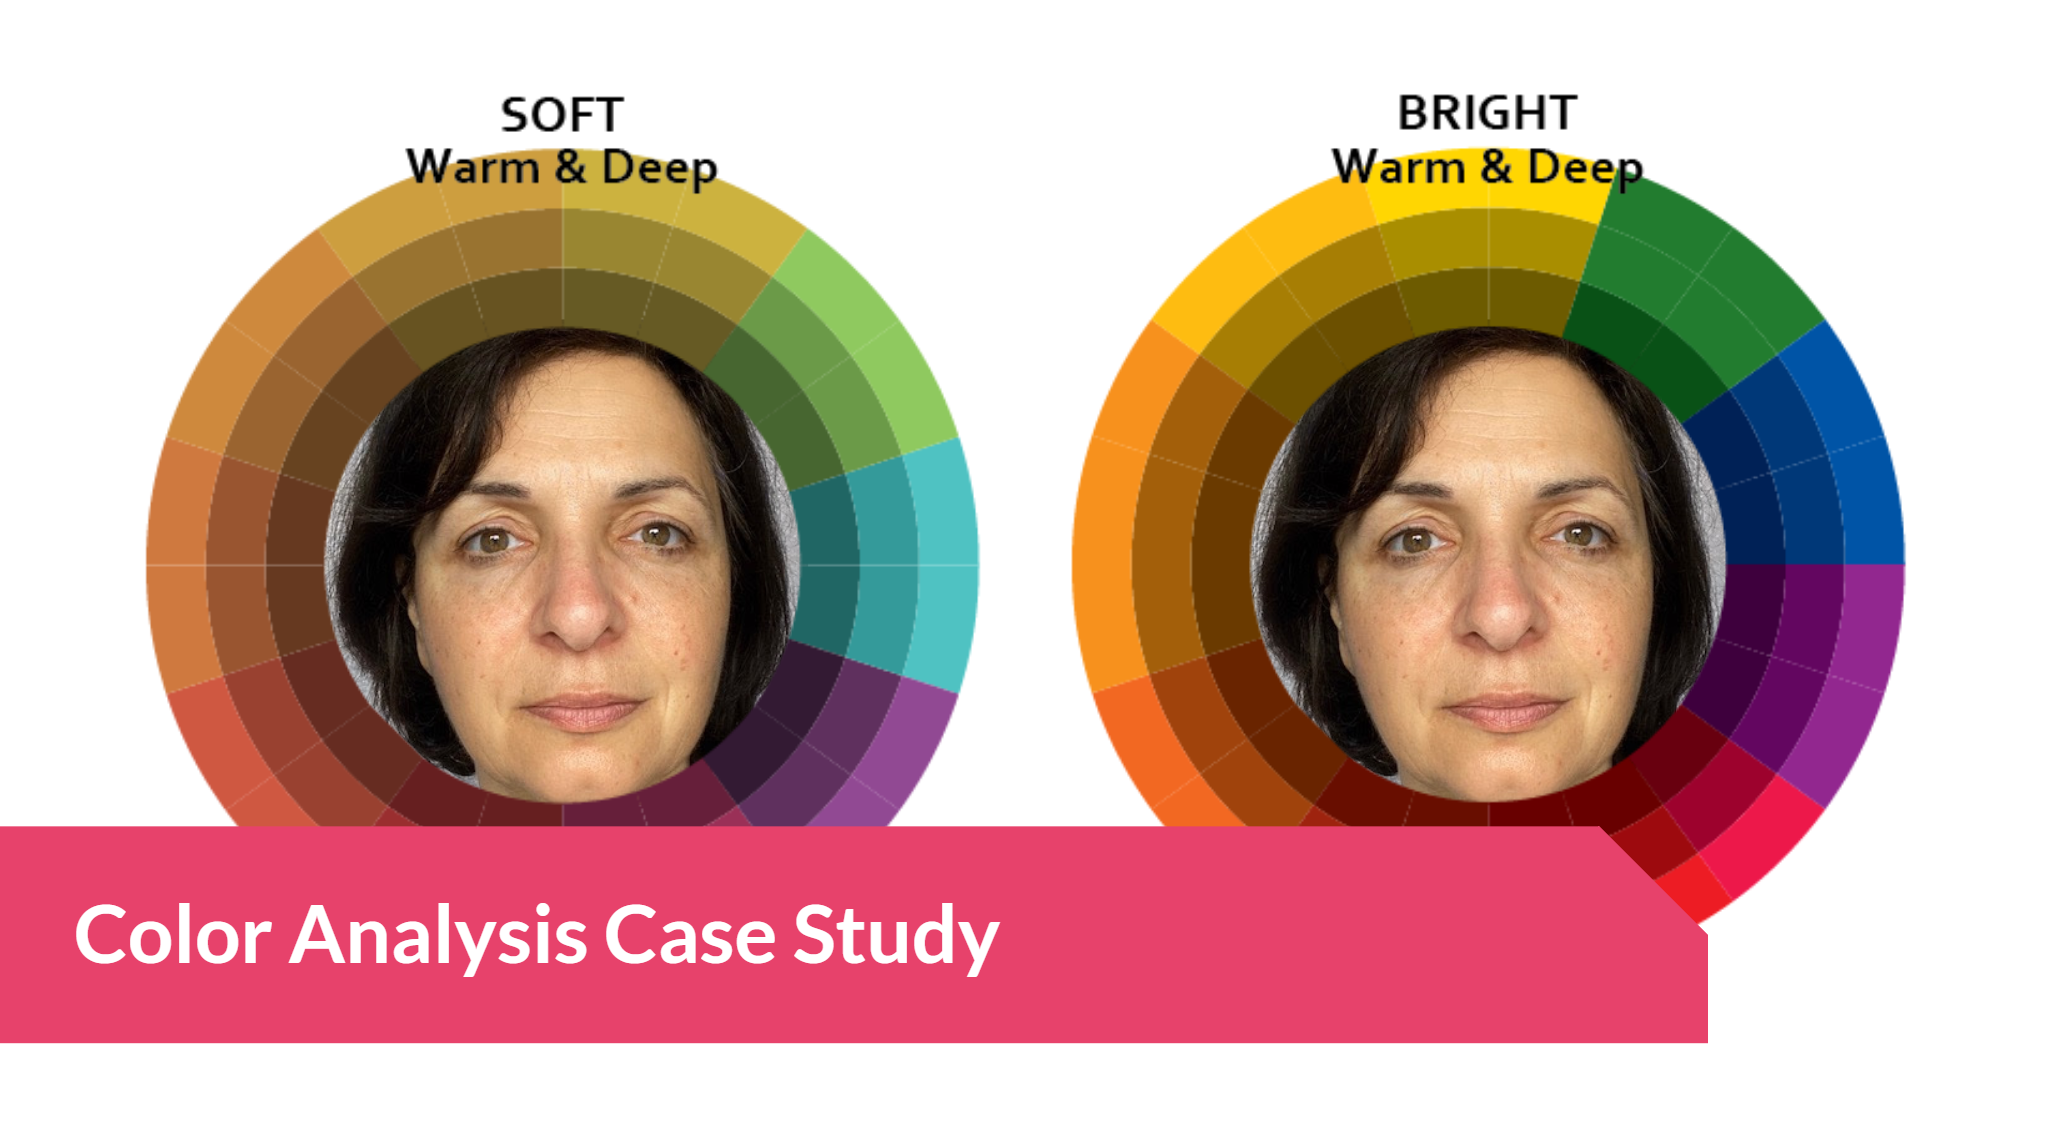 Color Analysis Case Study: Soft warm and medium?